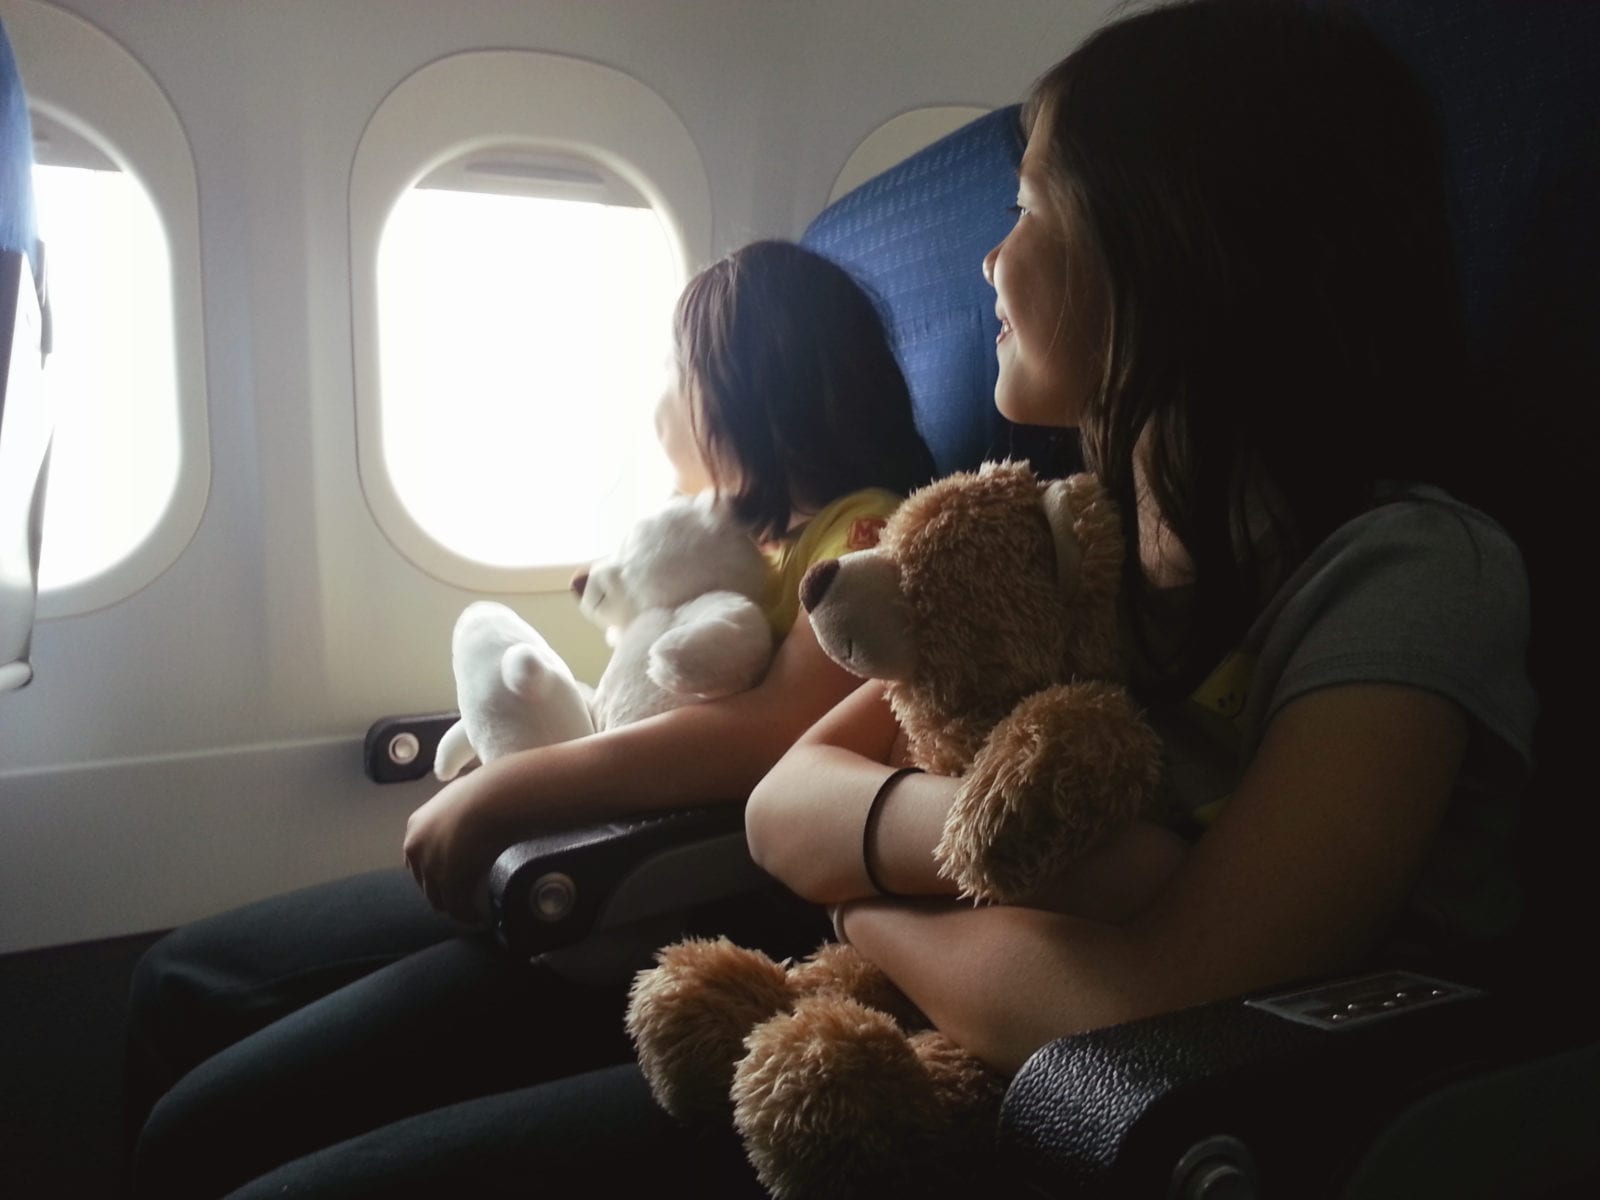 two girls holding stuffed animals sitting on an airplane